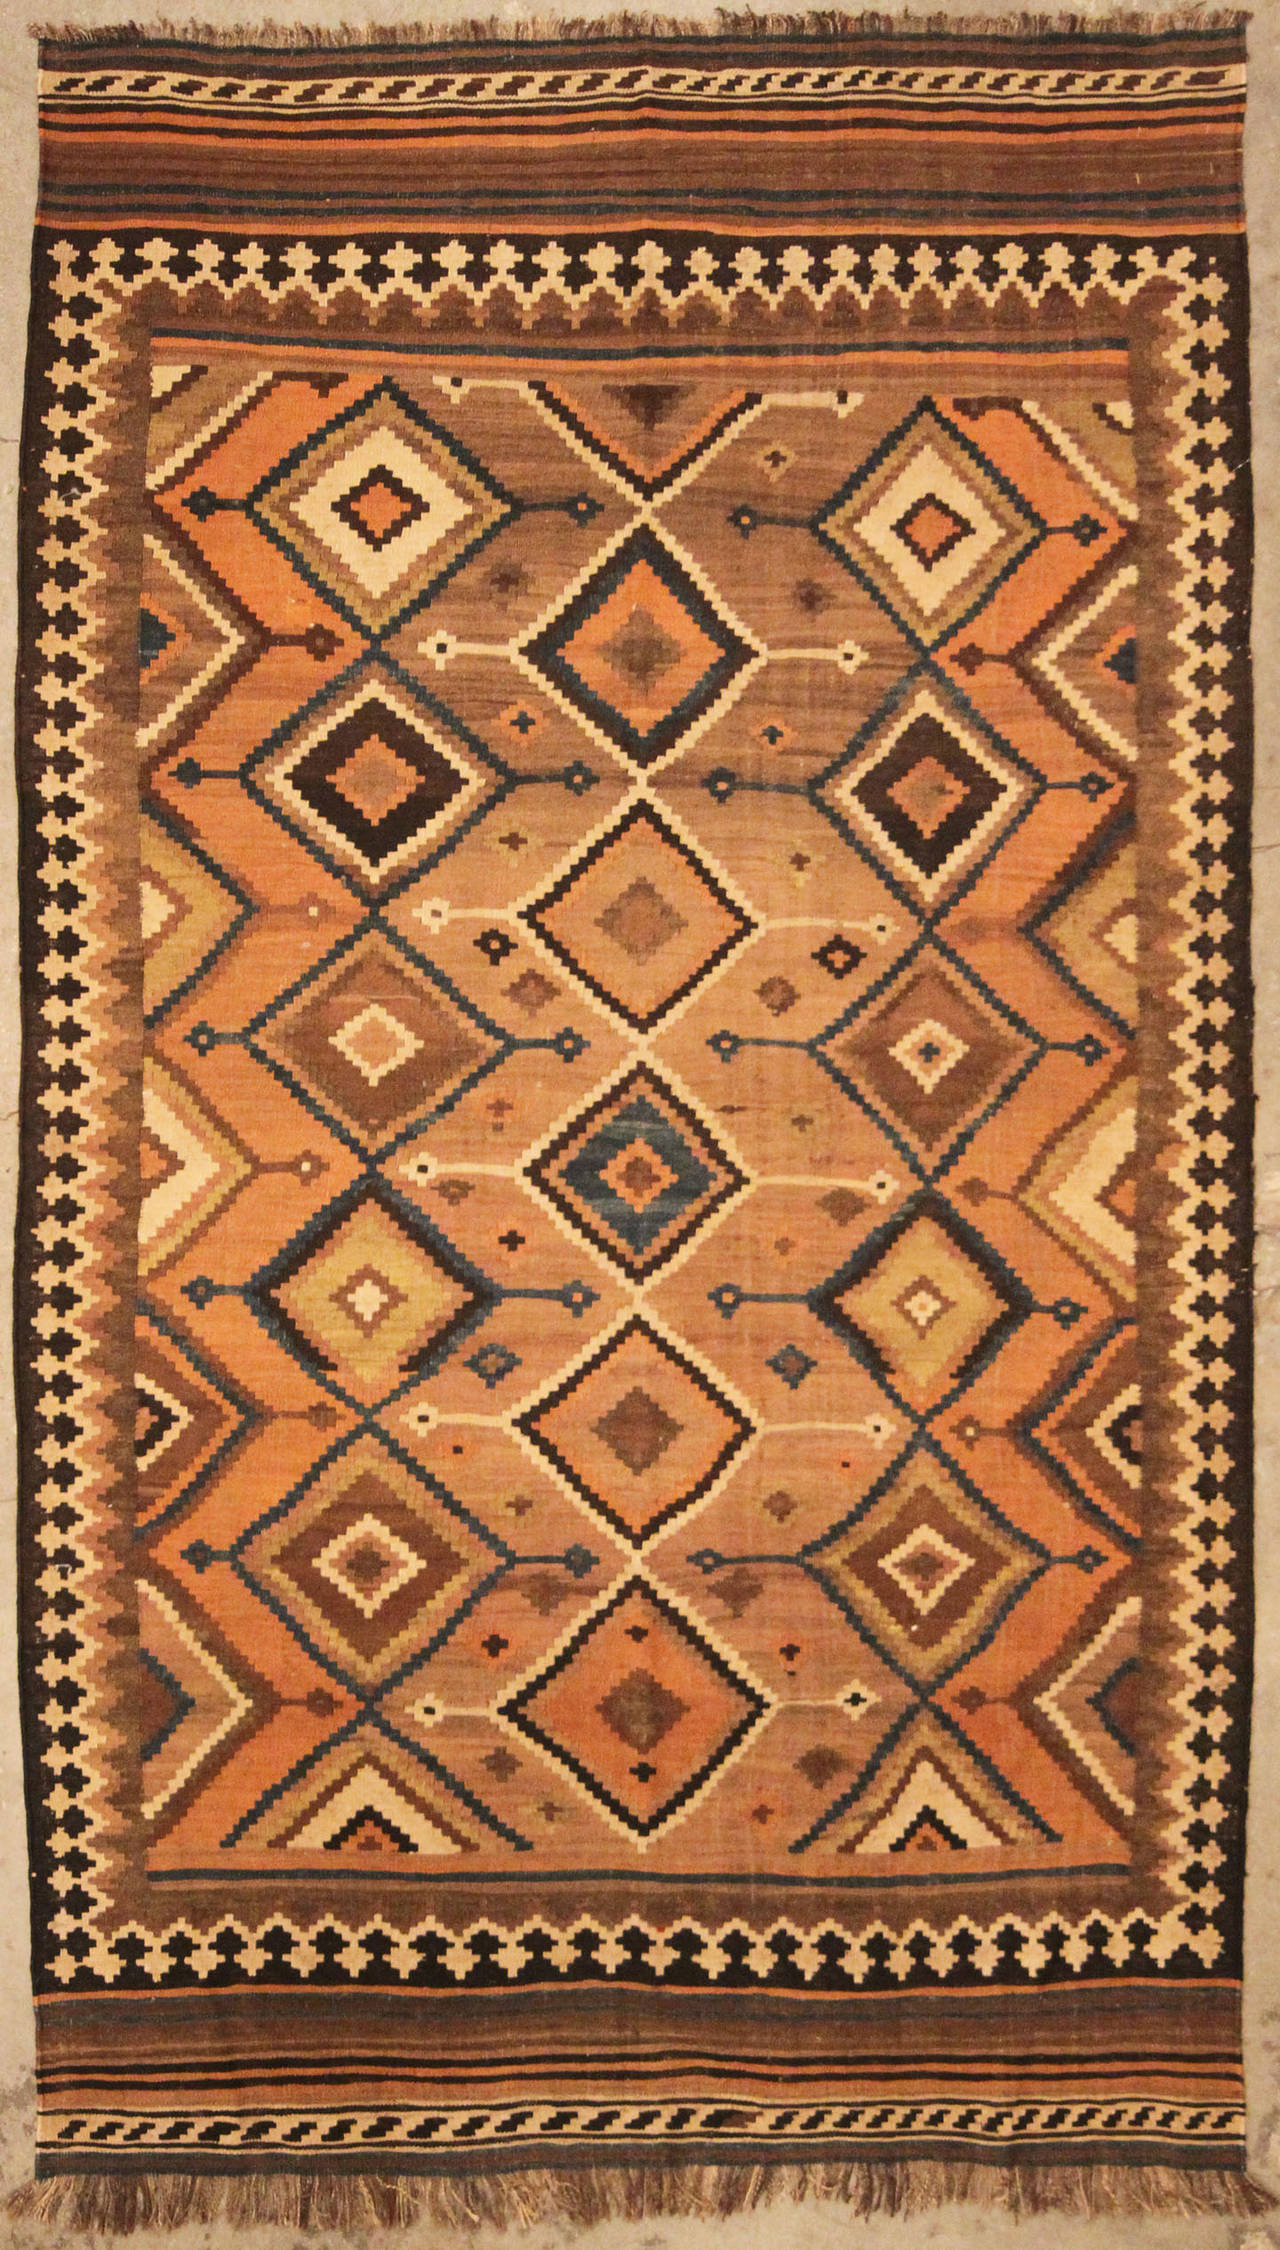 Colorful and dramatic Kilims (kelims) were produced by both villagers and tribal nomads in Persia. Slit tapestry predominated among Azerbaijani, Shahsevan and Qashqa'i weavers, while some Kurds and others in western Persia used interlocked tapestry.